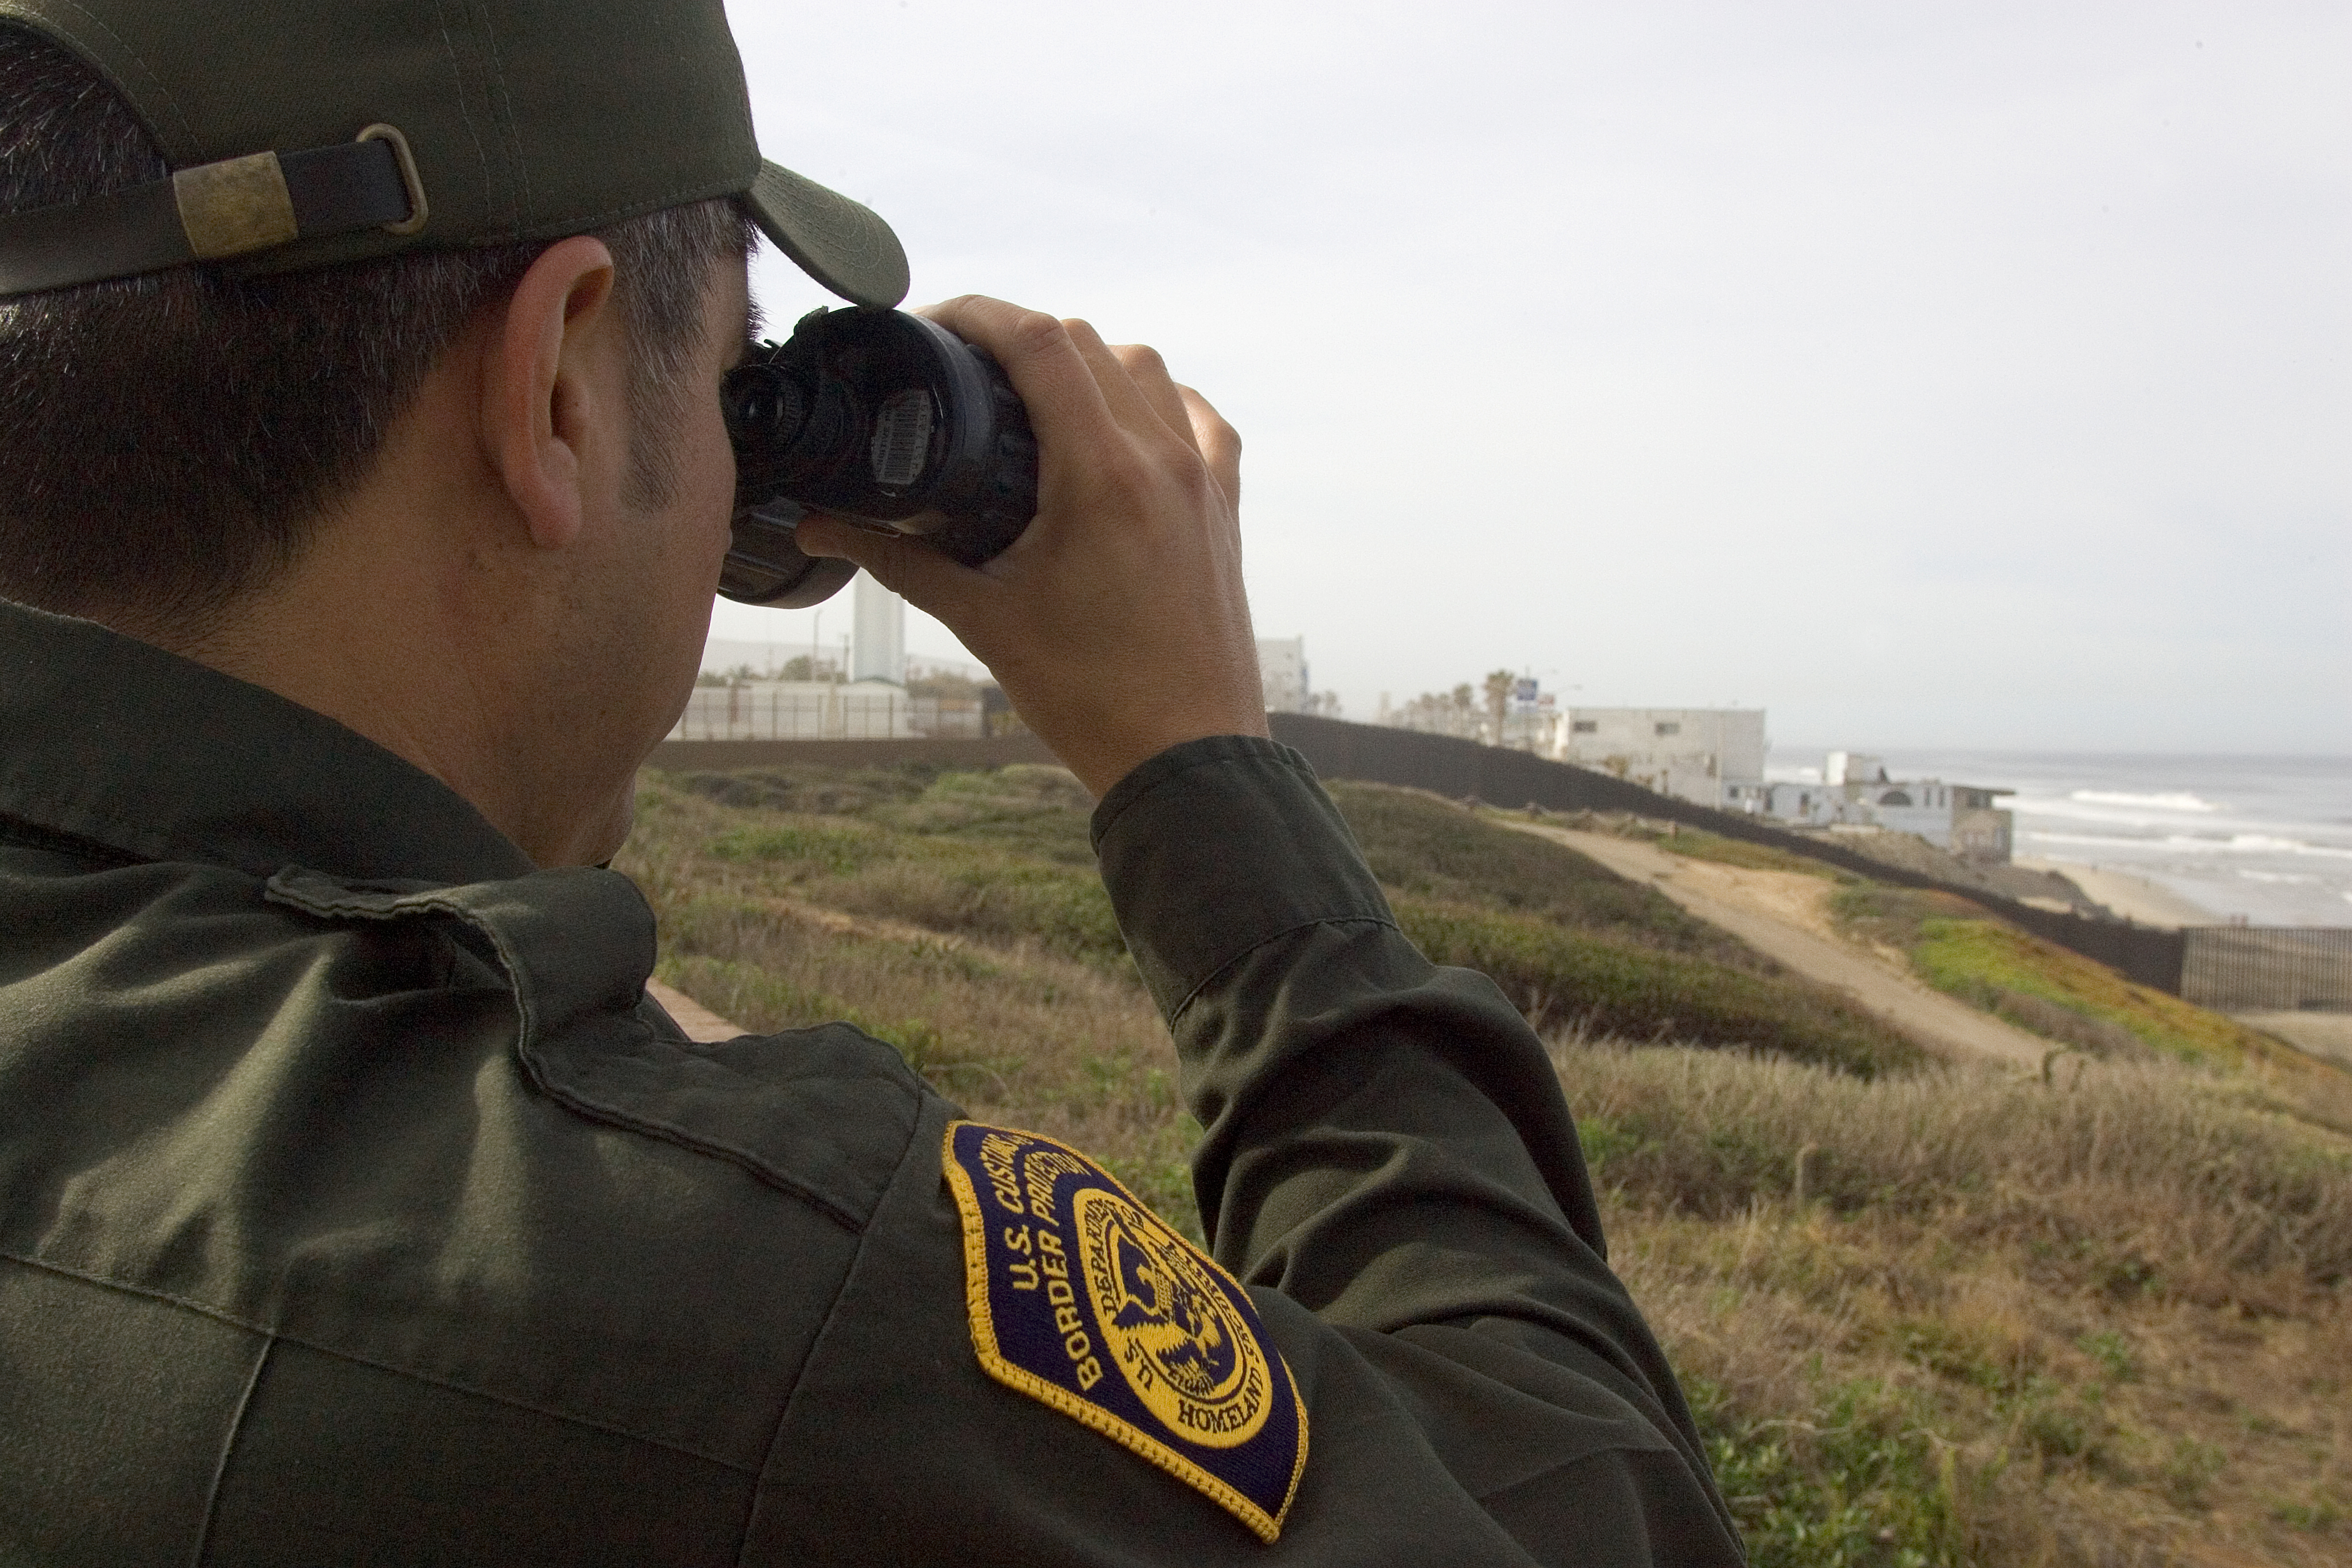 U.S. Border Patrol agent watches people as they gather next to the U.S./Mexico border in Imperial Valley, CA.